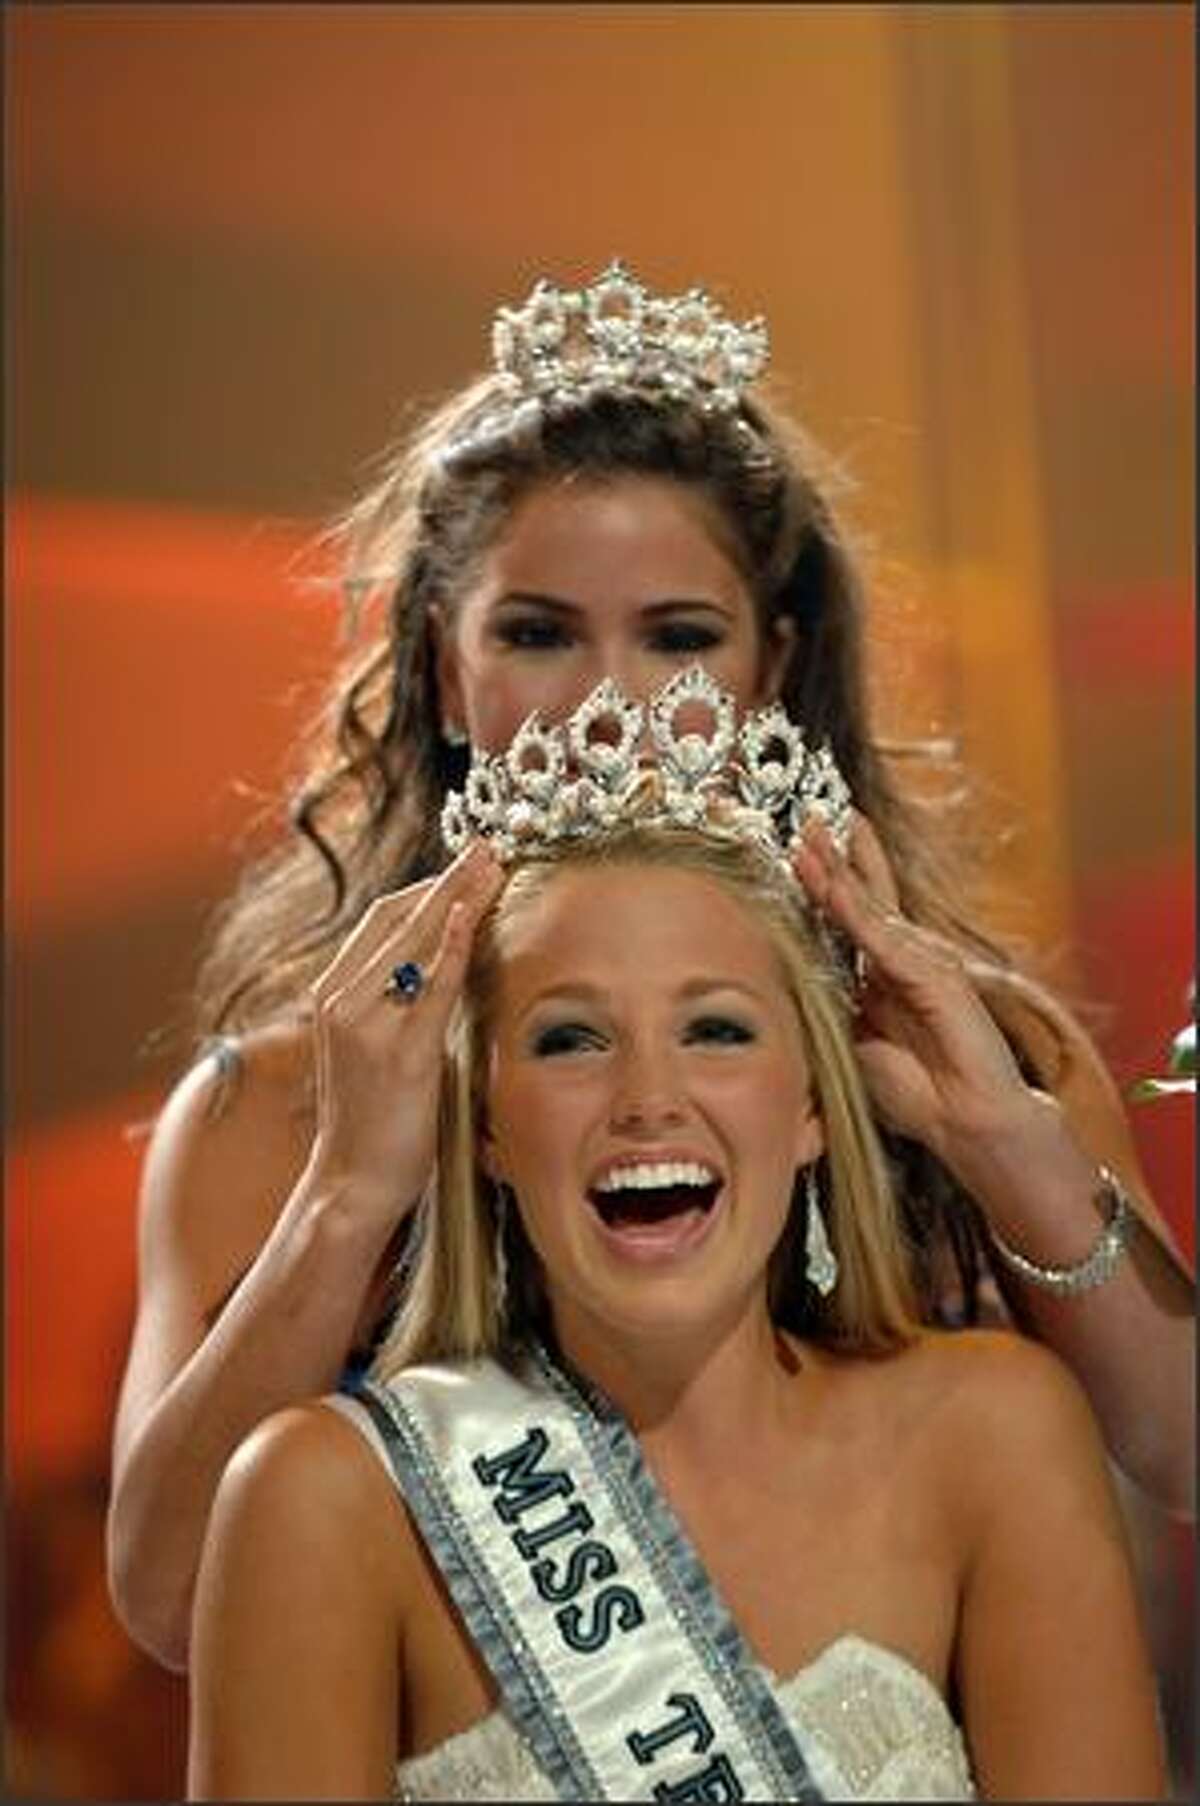 Allie LaForce reacts while being crowned Miss Teen USA 2005 by Shelley Hennig, Miss Teen USA 2004.